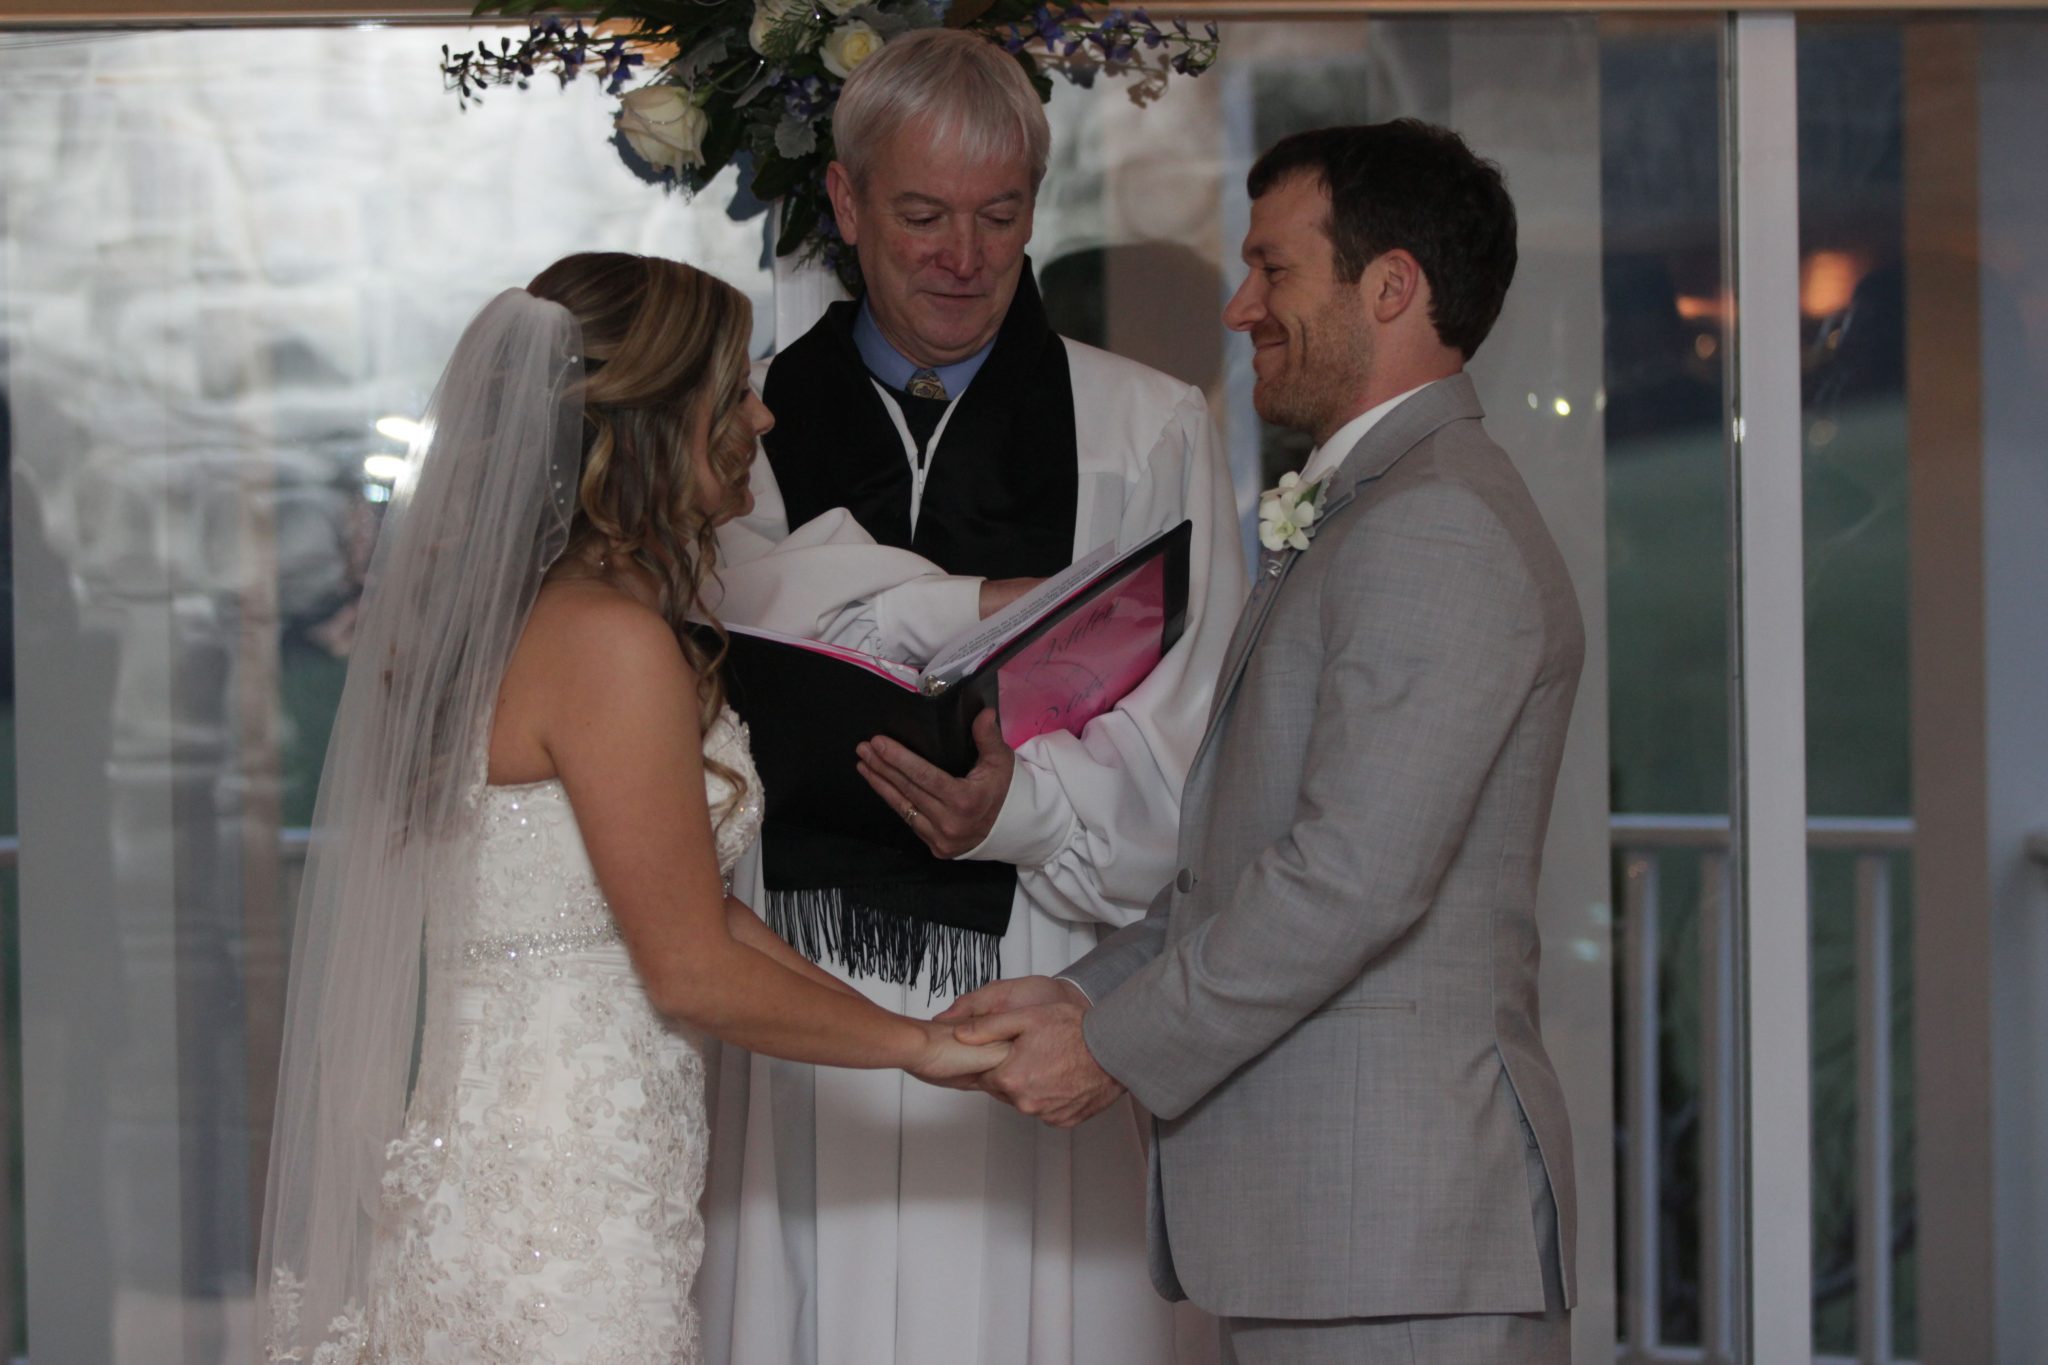 Vows during indoor wedding ceremony in Frederick MD